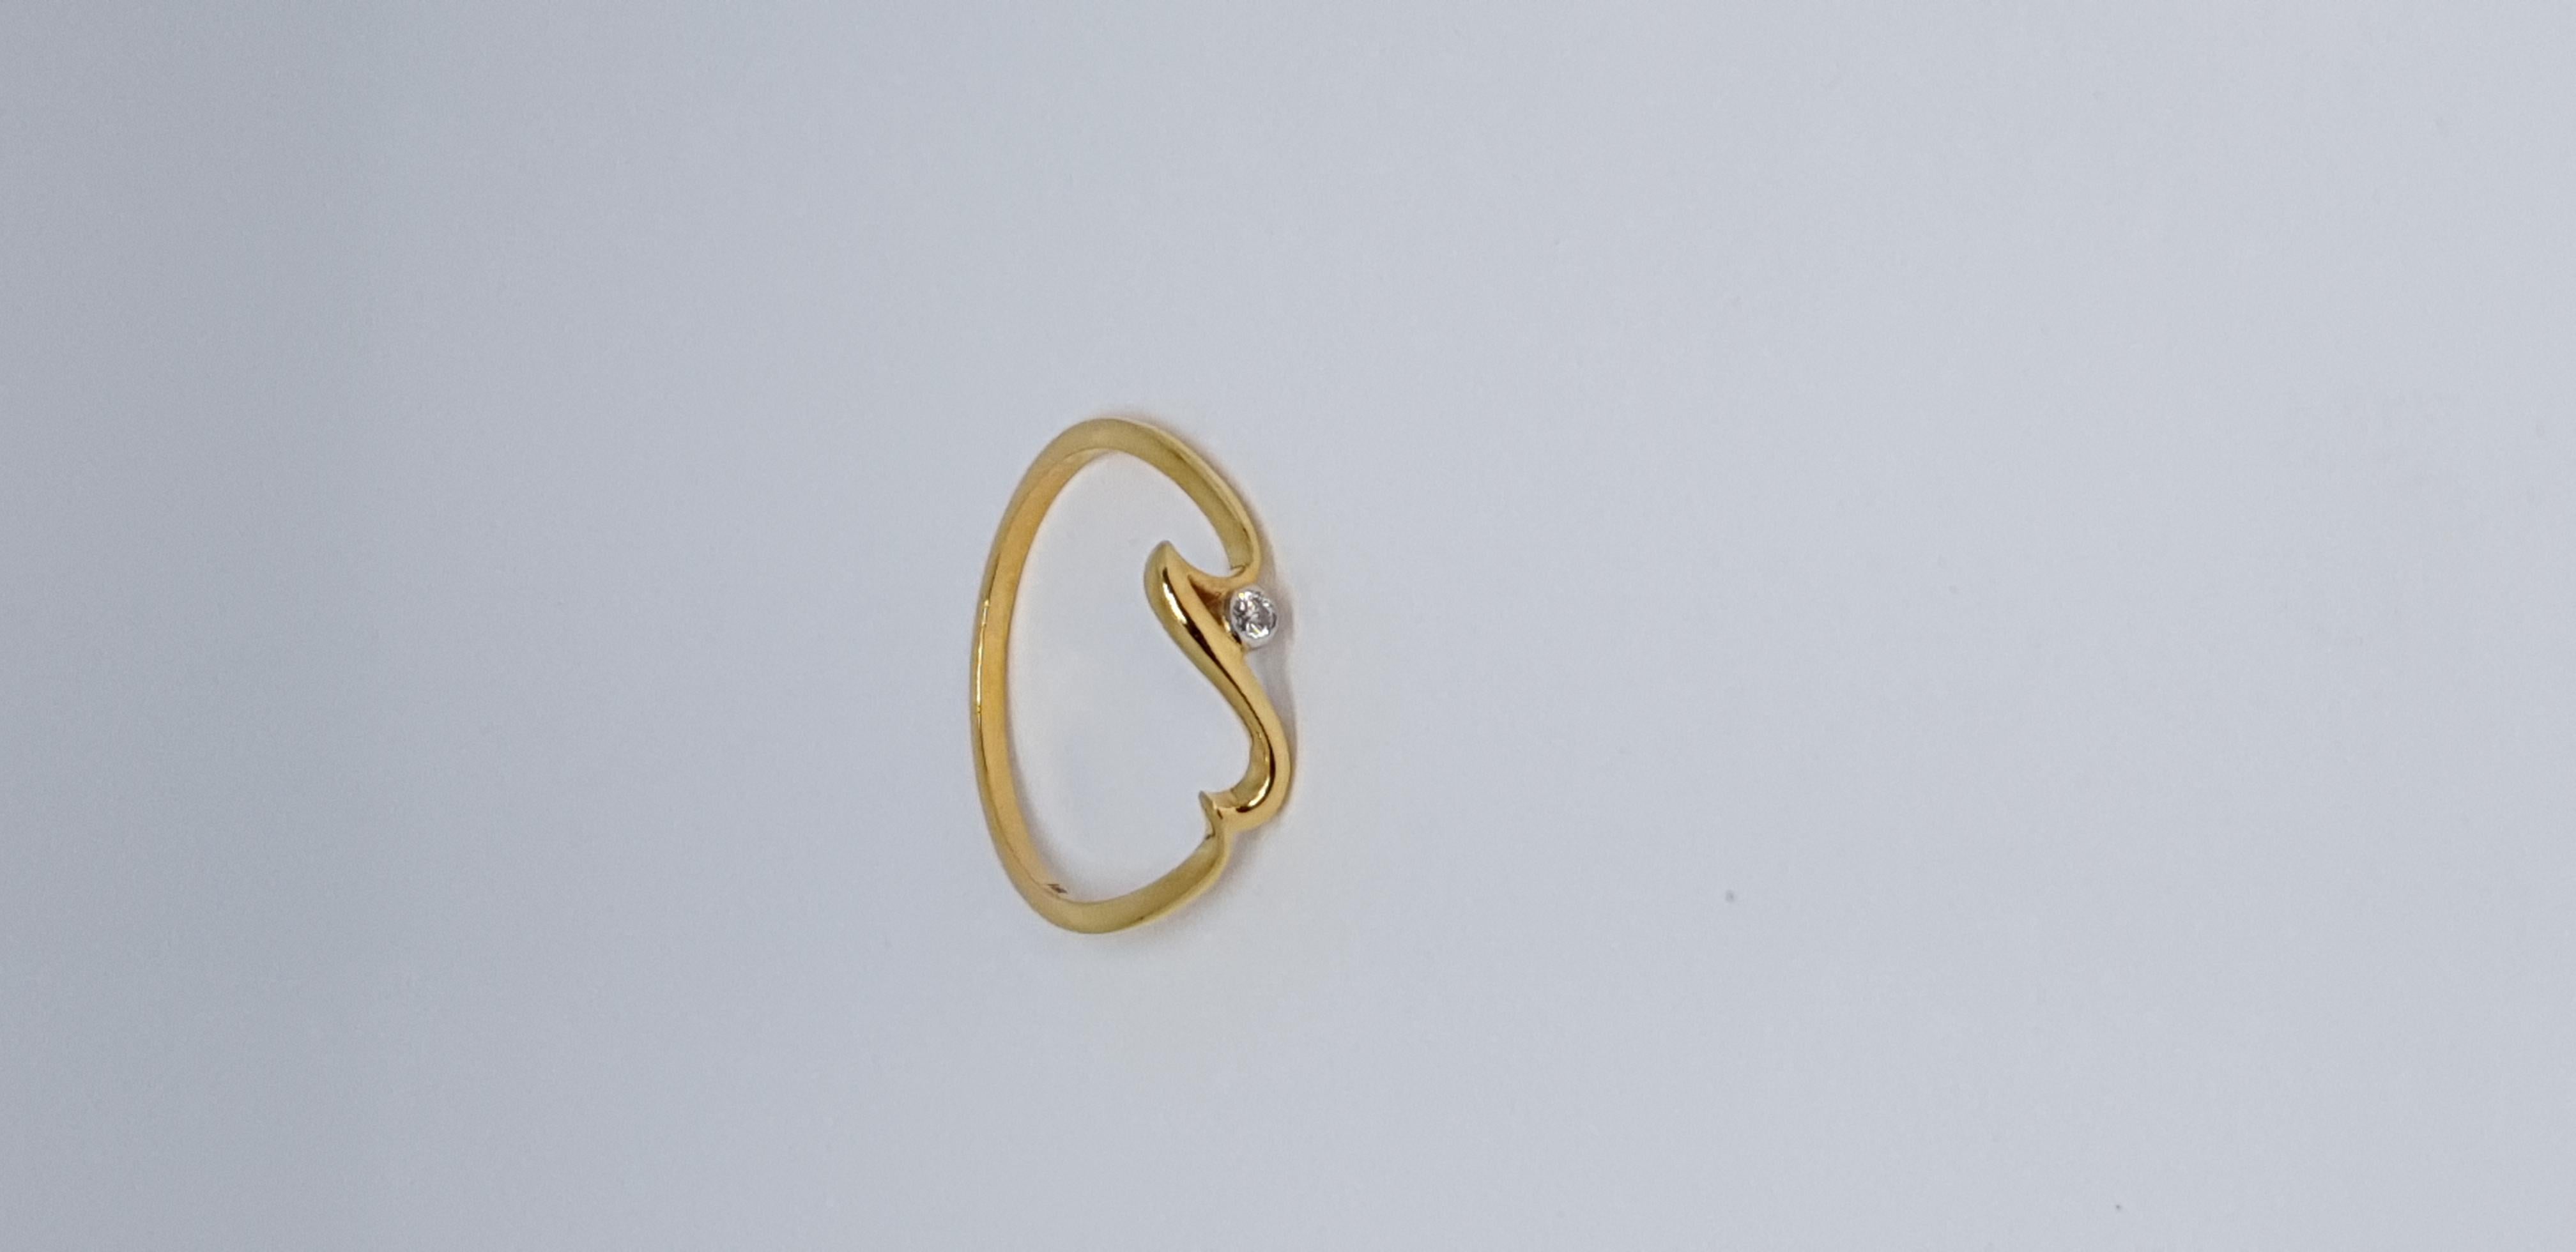 For Sale:  Natural Diamond Wave Ring 14K Solid Gold Dainty Ocean Lover Jewelry Gift. 5